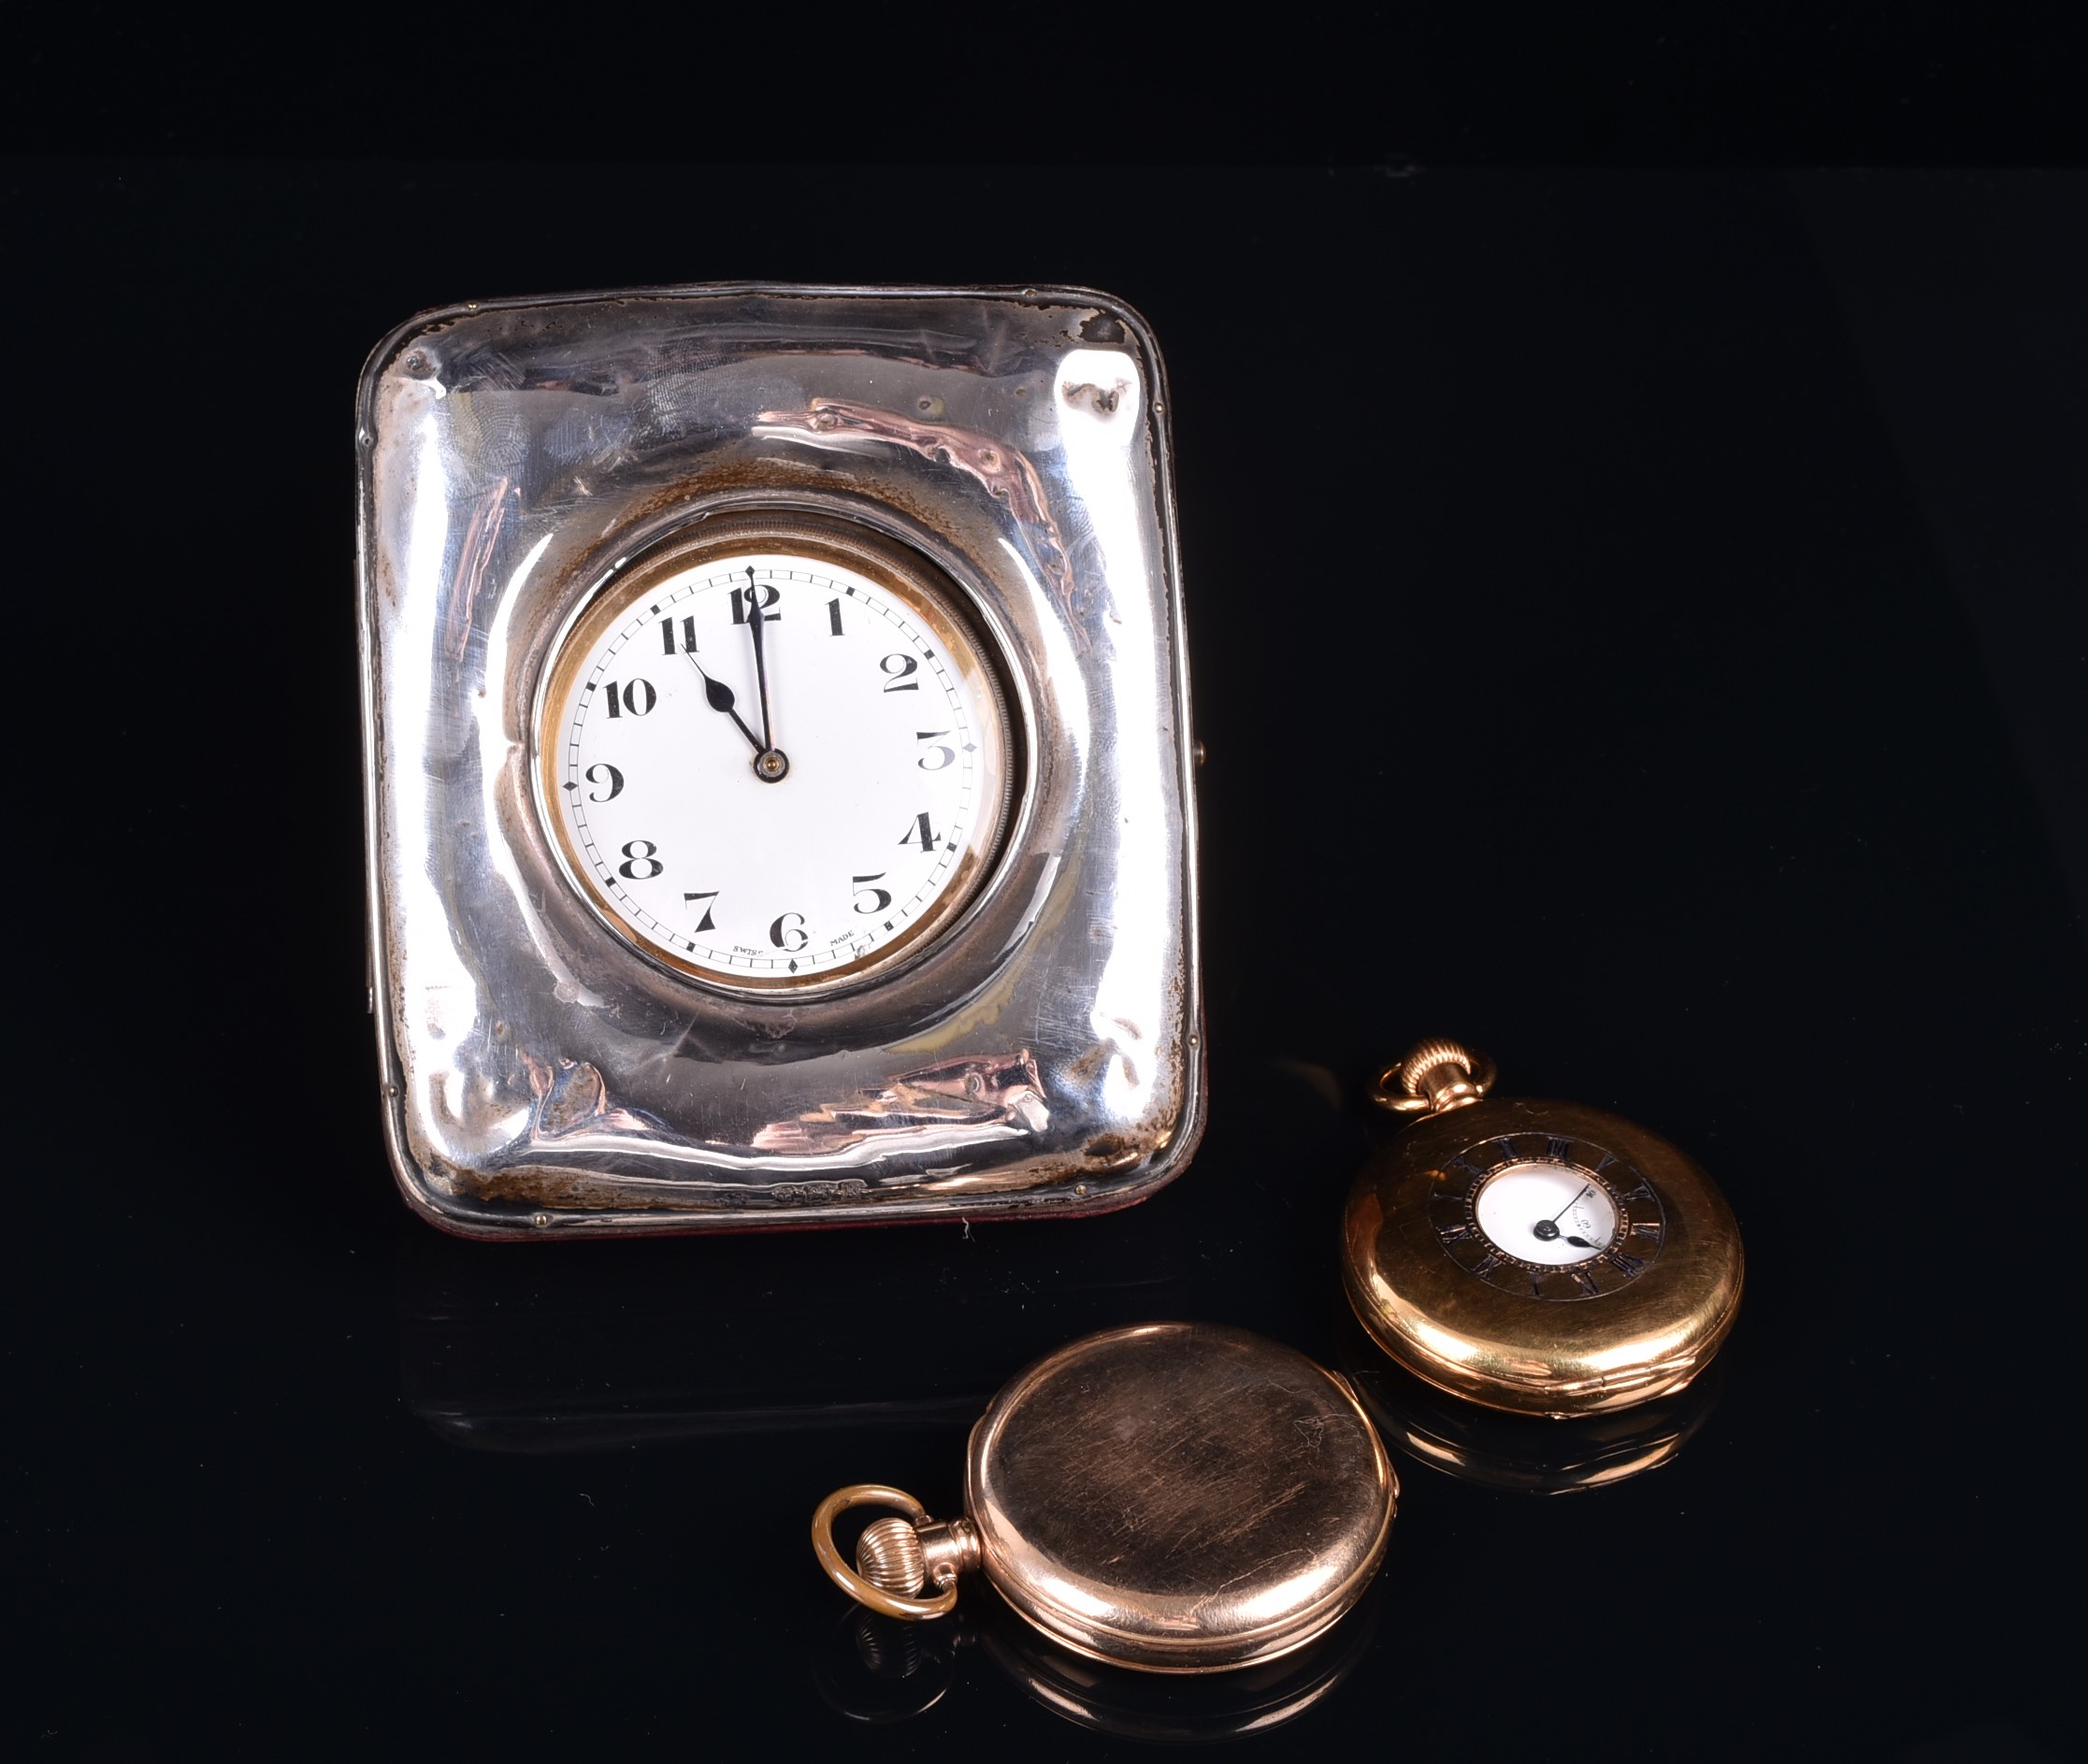 A Prescot gold plated half hunter pocketwatch together with a Waltham USA gold plated full hunter